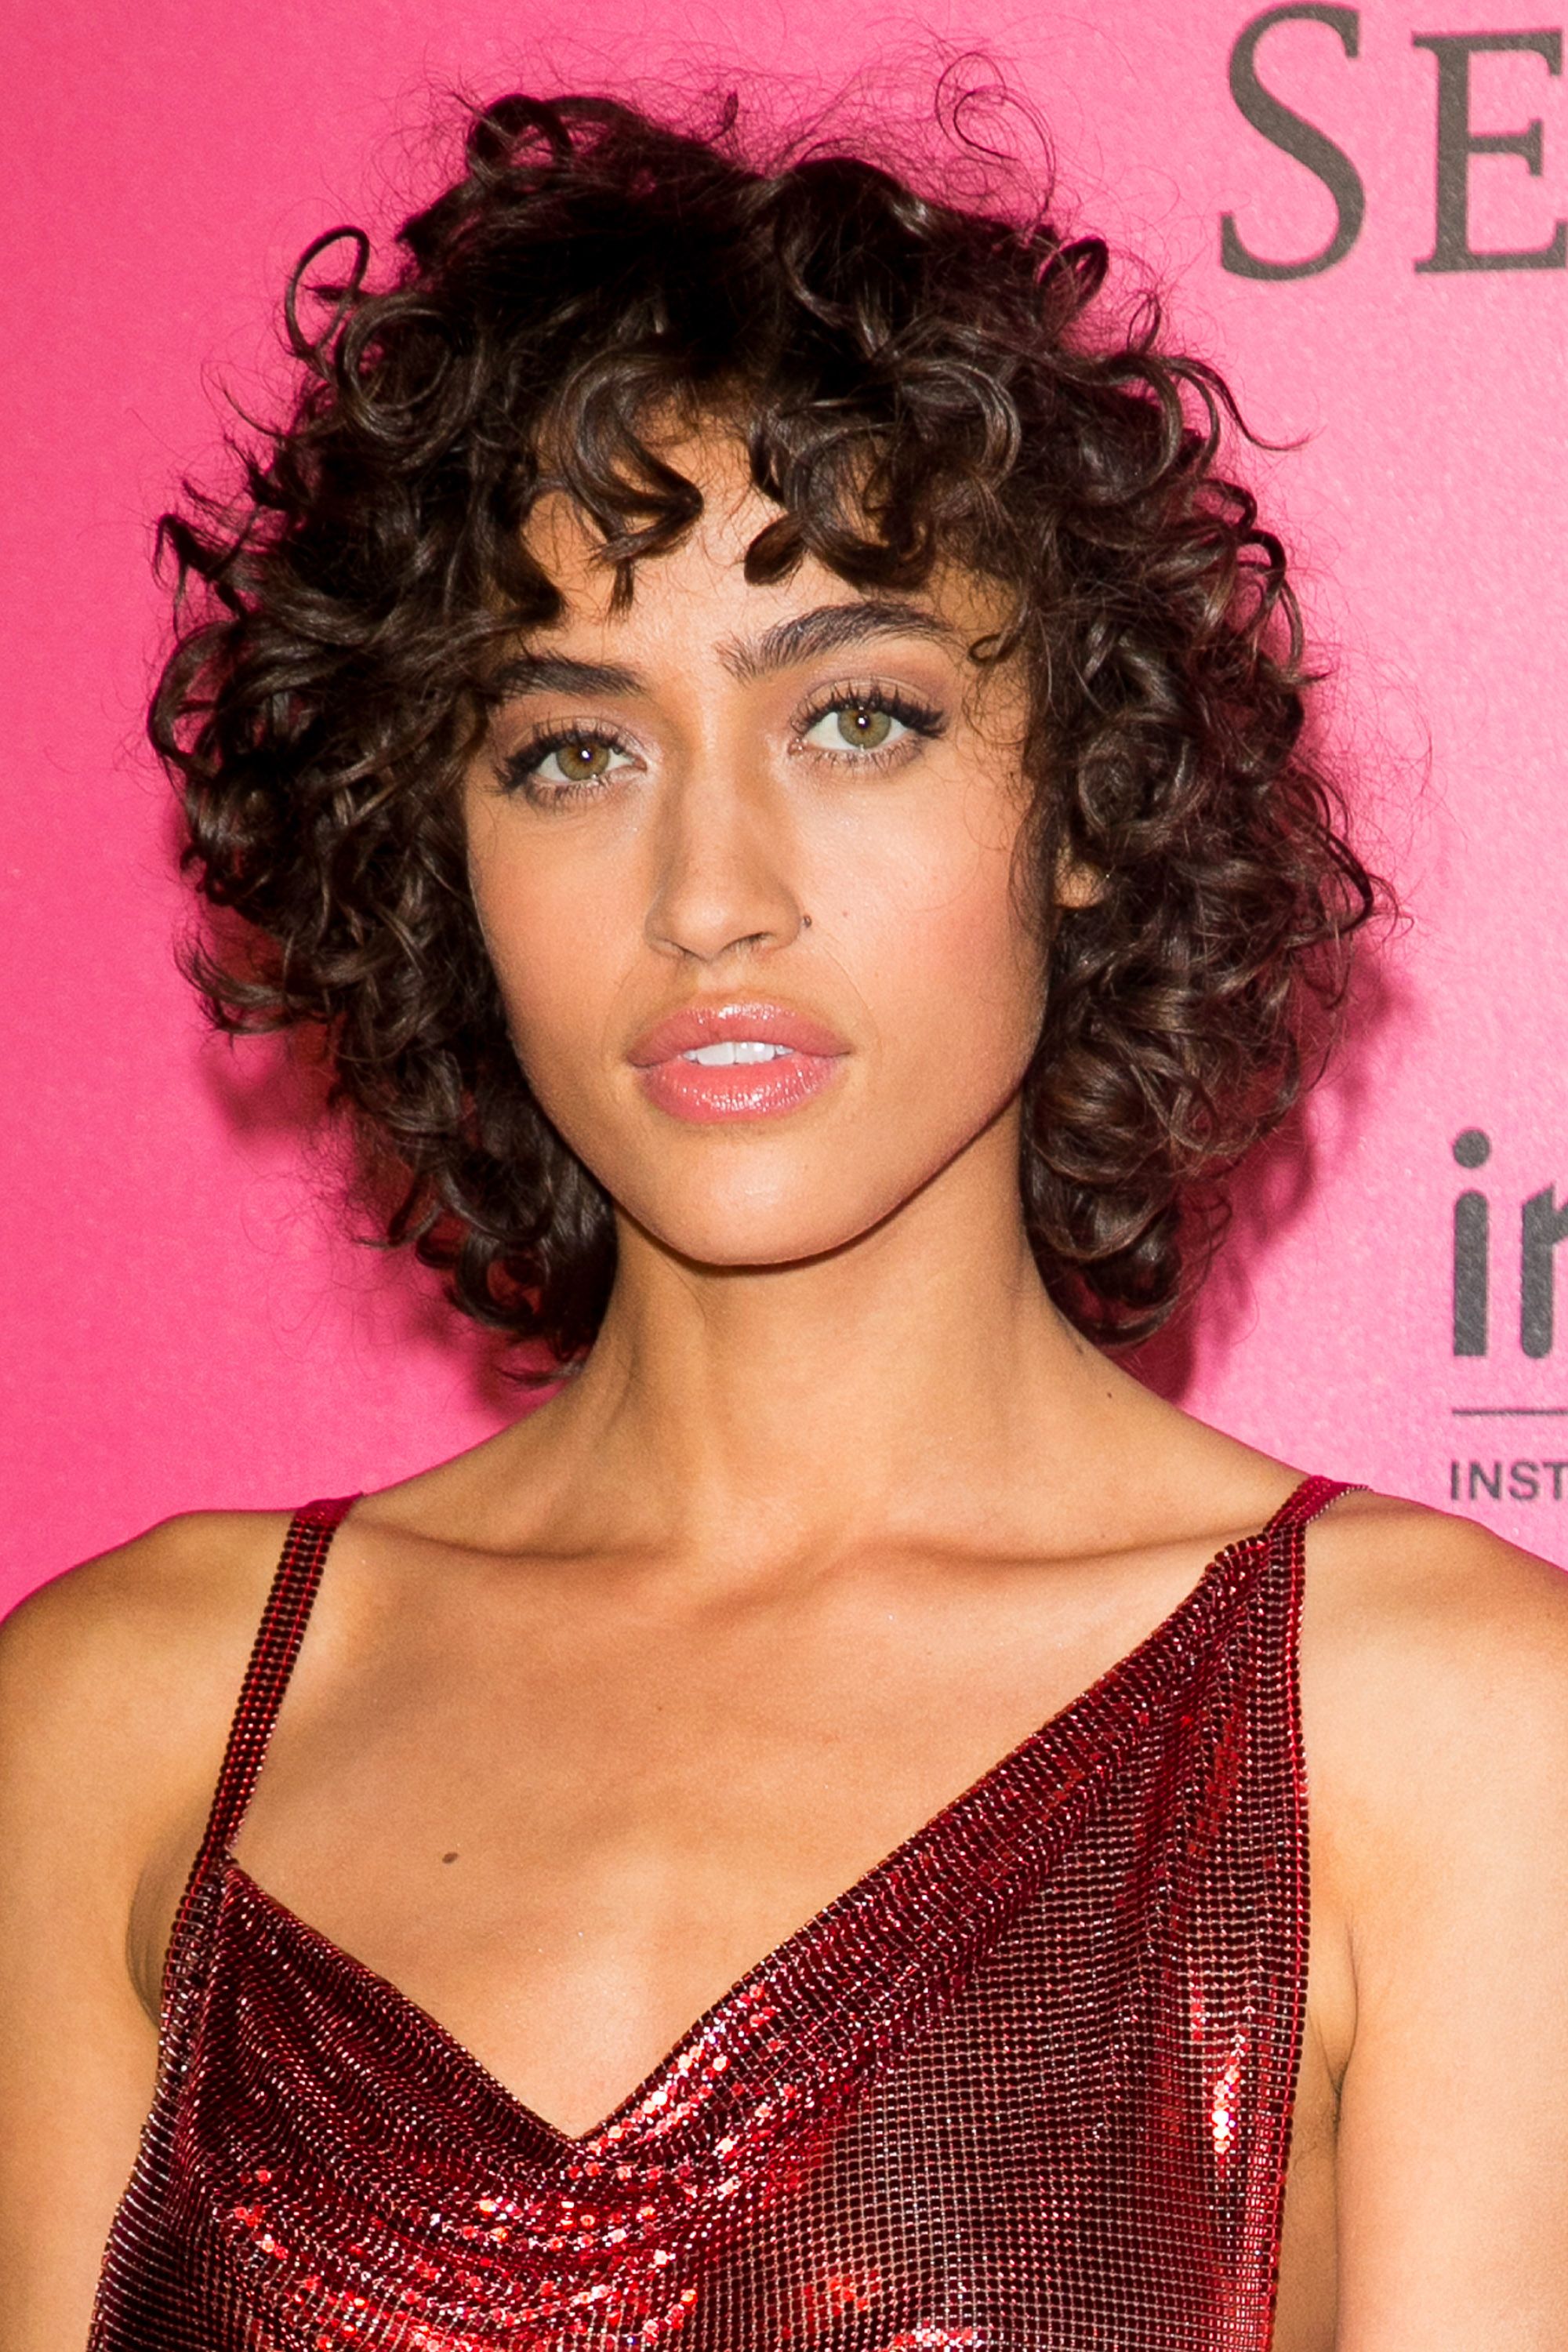 Hairstyles for Long and Curly Hair: 7 of the best